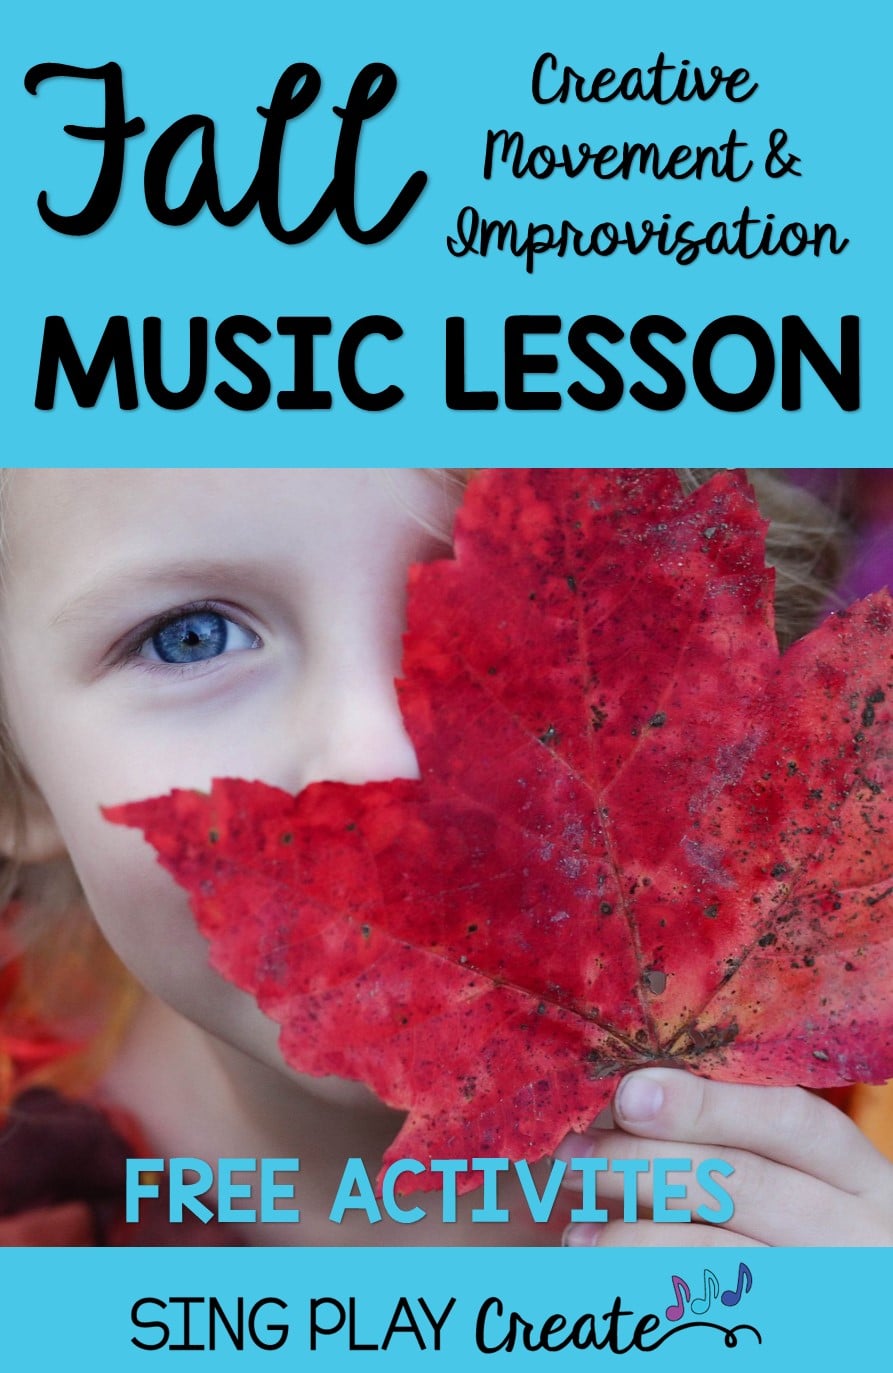 Fall Music Lesson: Creative Movement and Inspiration